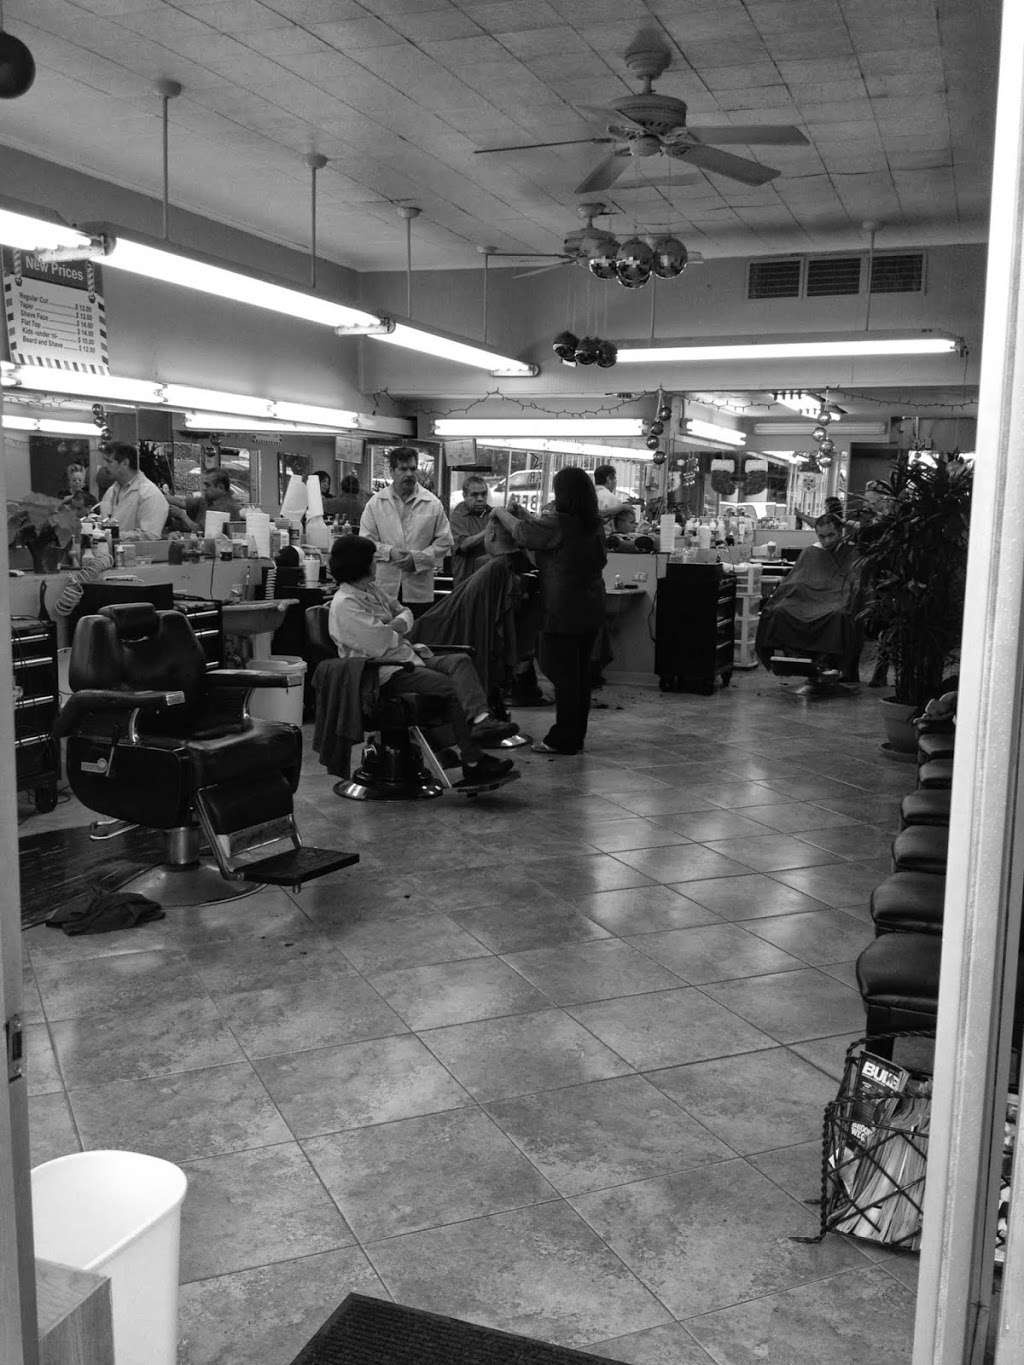 Star Barber Shop | 313 S Vermont Ave, Los Angeles, CA 90020, United States | Phone: (213) 908-5863